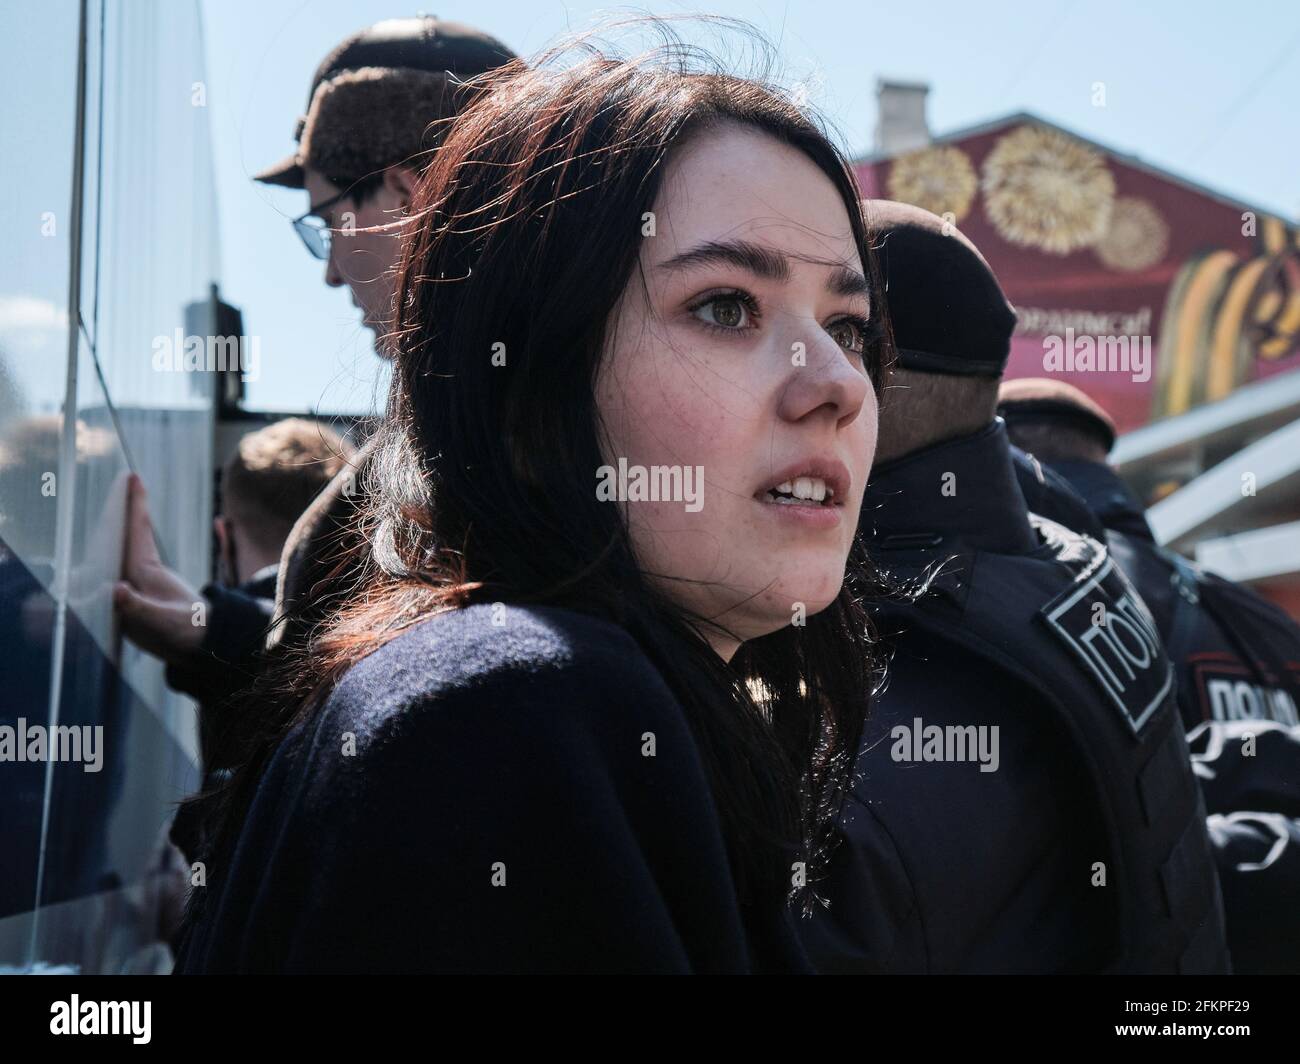 Worried girl during the detention of the Communists near the paddy wagon. Day of International Workers' Solidarity 1 May. Meeting of the Communist Party deputies with supporters in the Novopushkinsky square. (Photo by Mihail Siergiejevicz / SOPA Imag/Sipa USA) Stock Photo